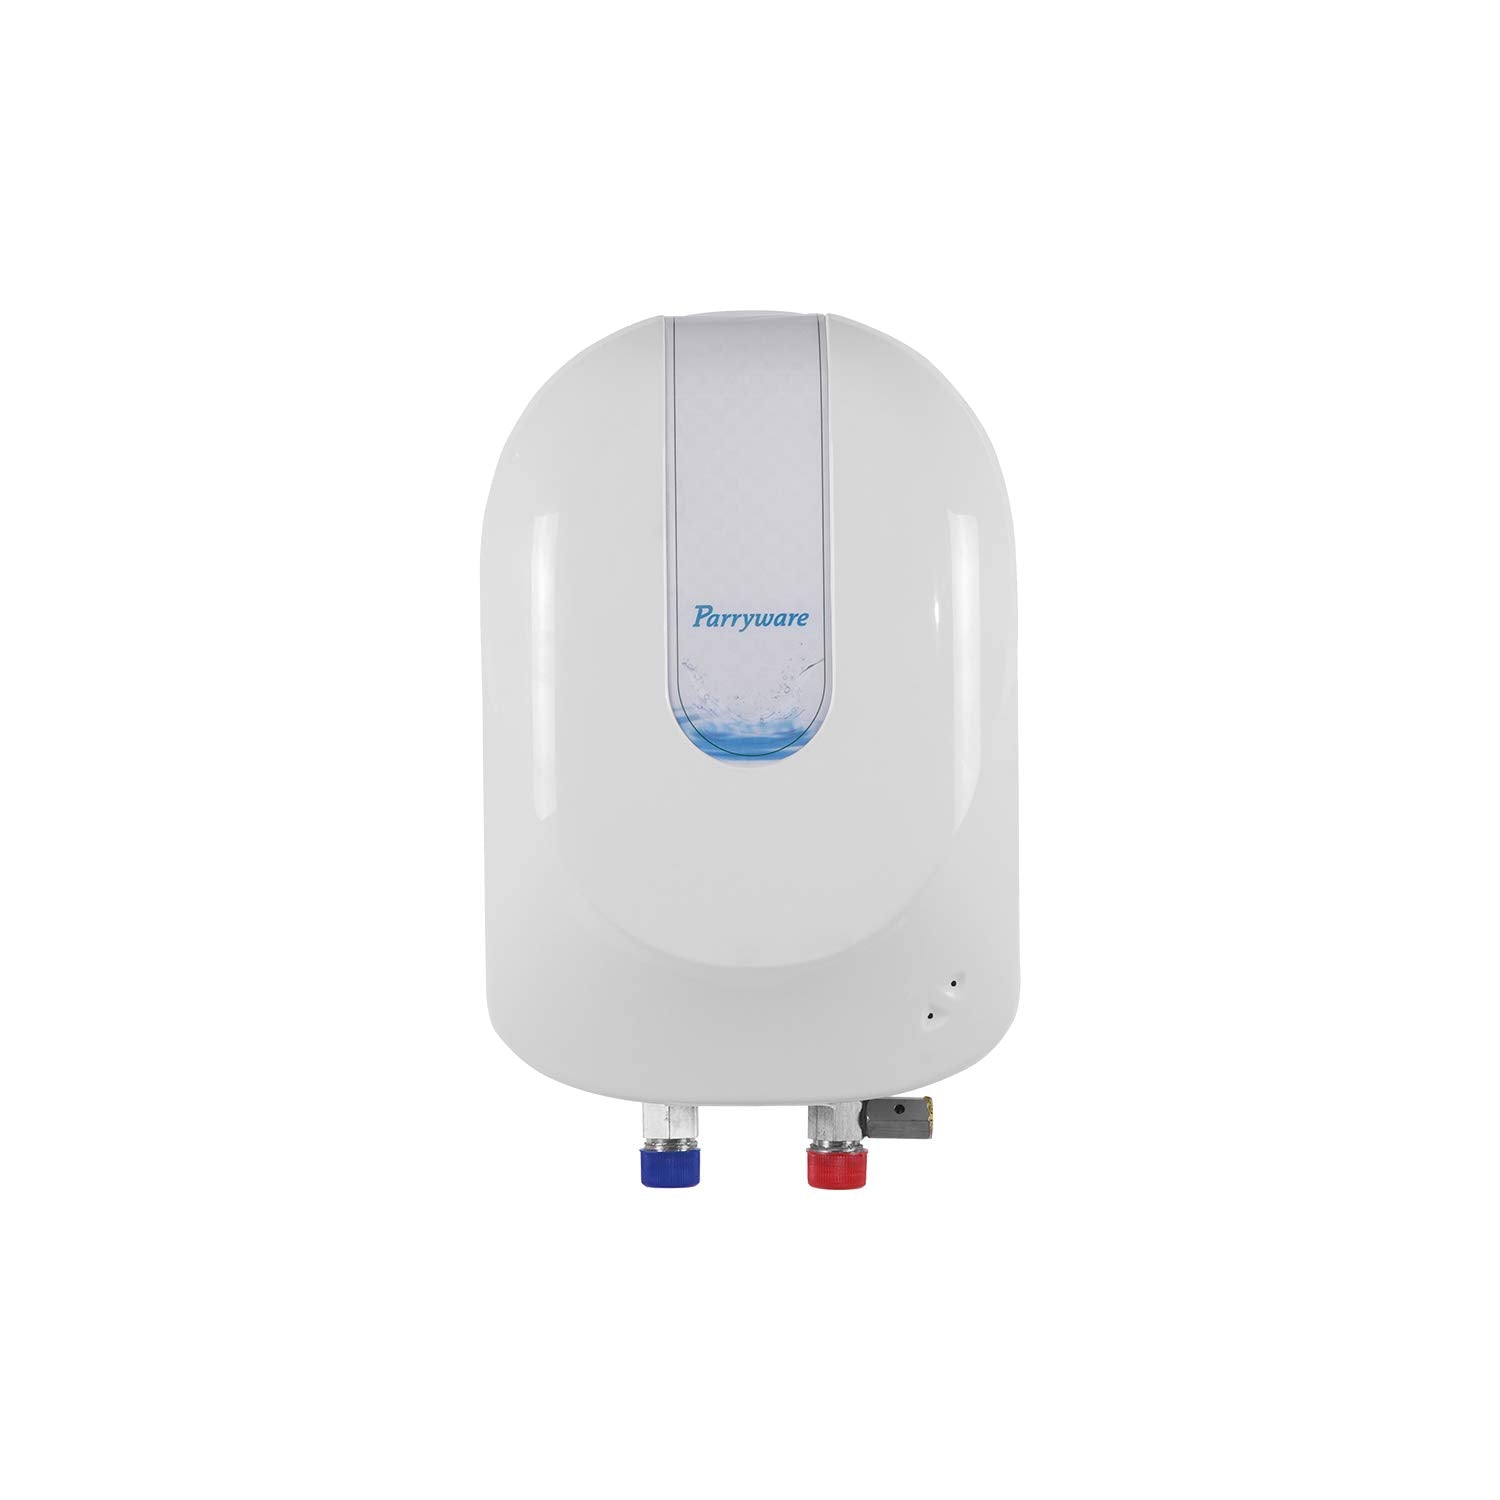 Parryware 4.5 KW Geyser 1 L with Automatic Temperature Control (White)